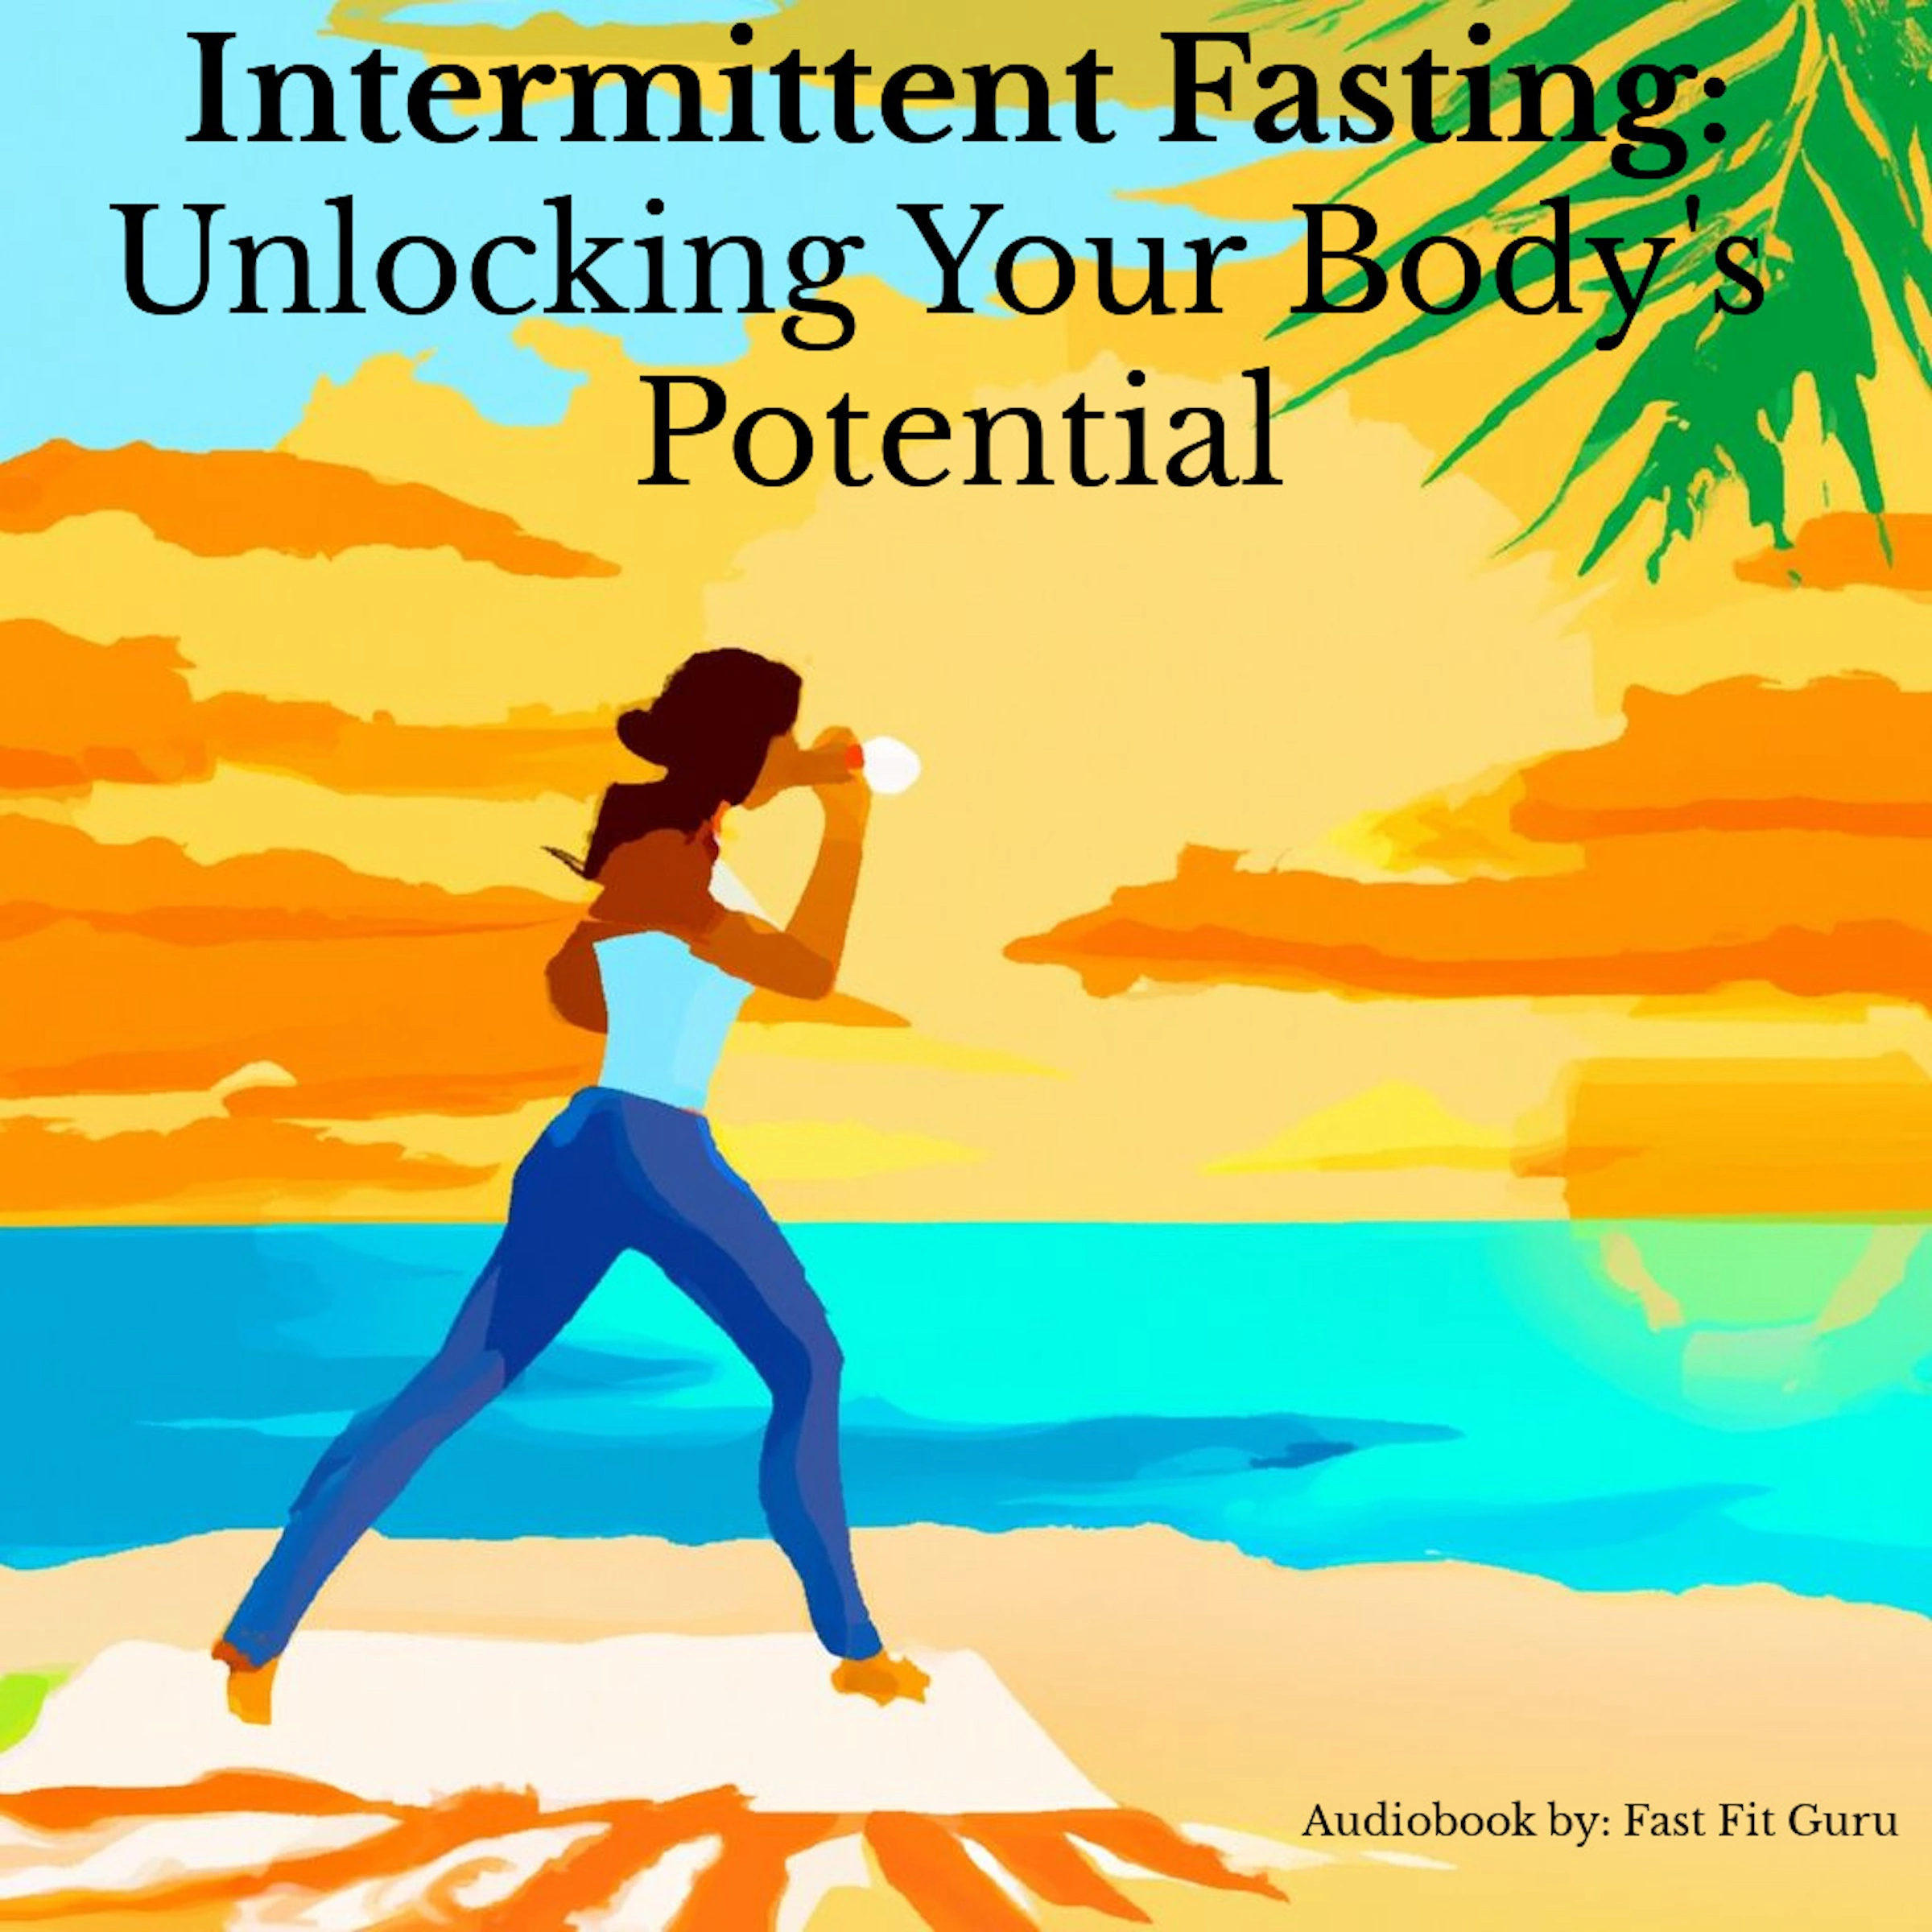 Intermittent Fasting: Unlocking Your Body's Potential Audiobook by Fast Fit Guru